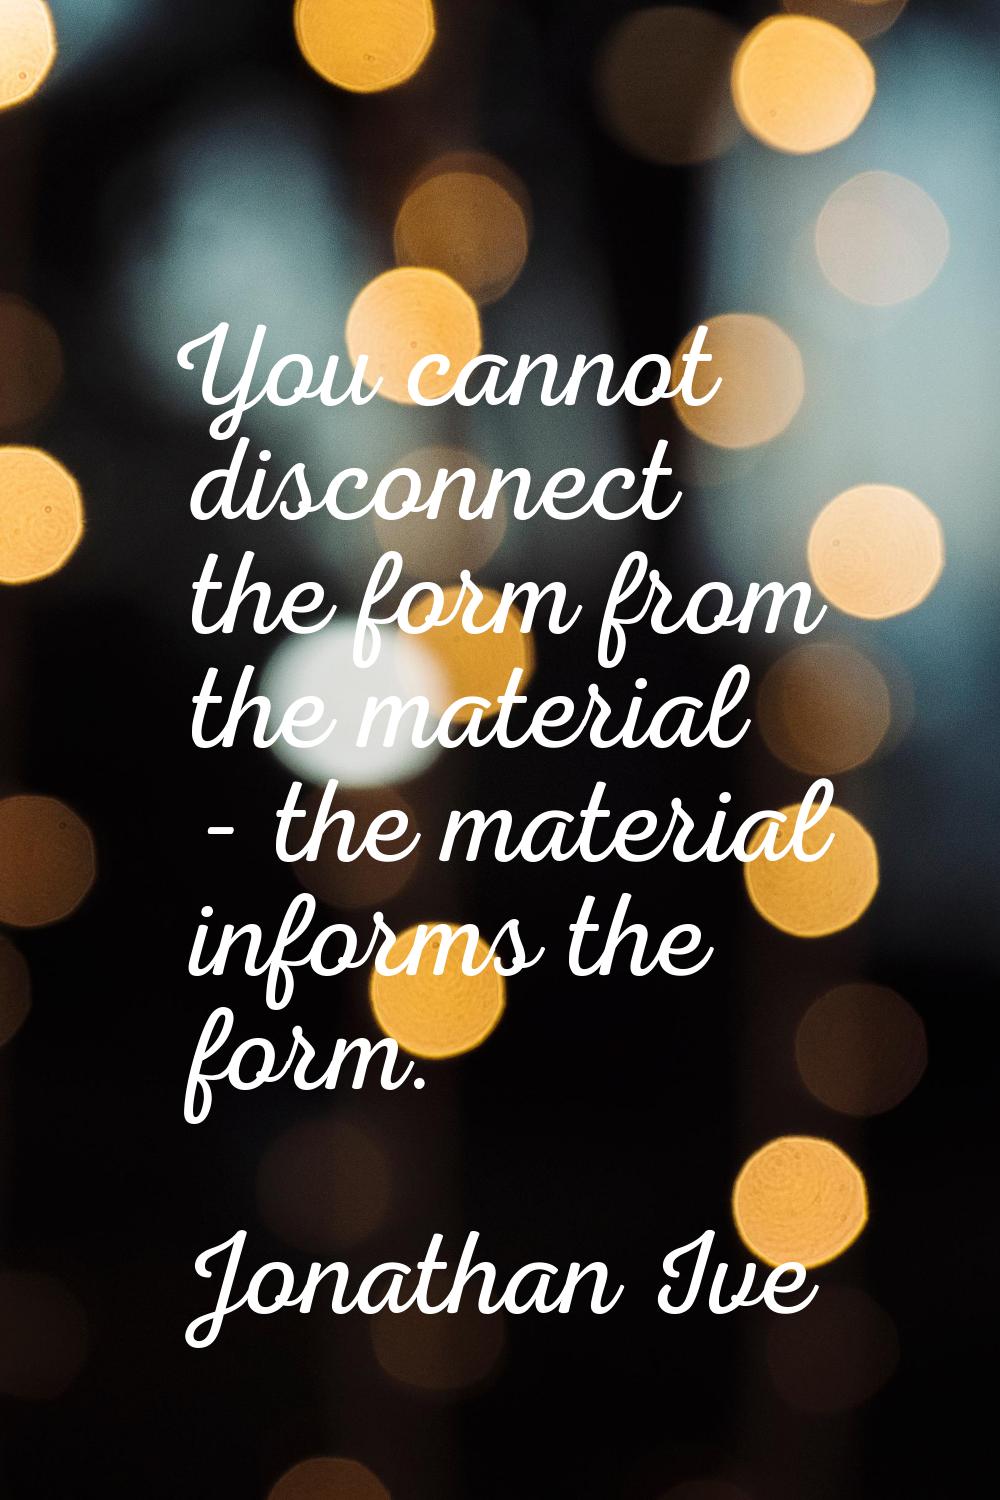 You cannot disconnect the form from the material - the material informs the form.